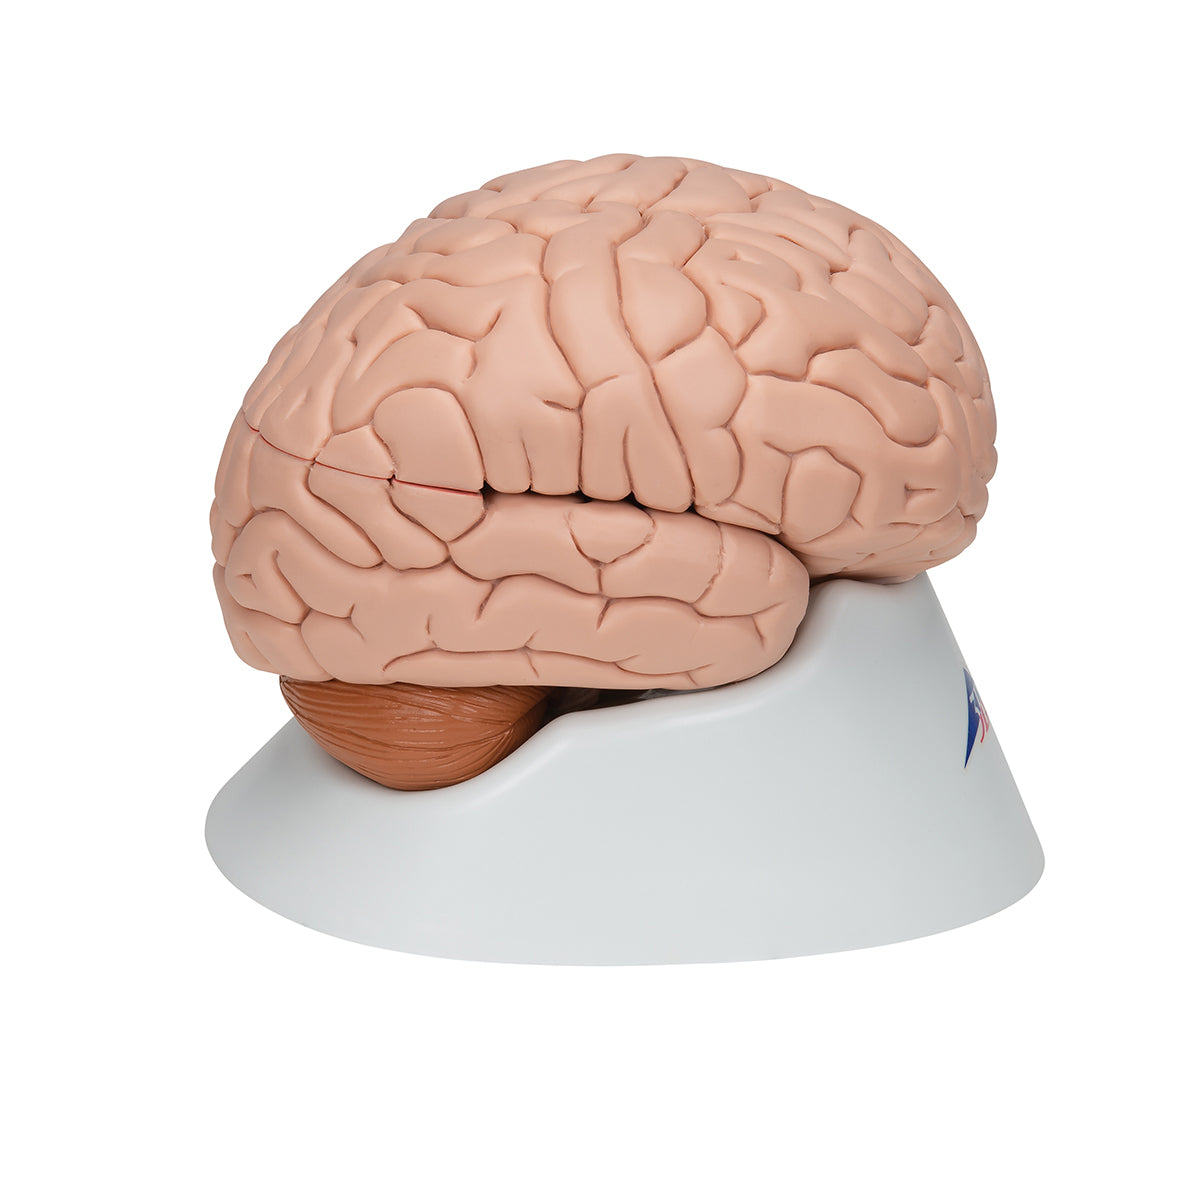 Brain model with a less lifelike appearance. Can be separated into 8 parts